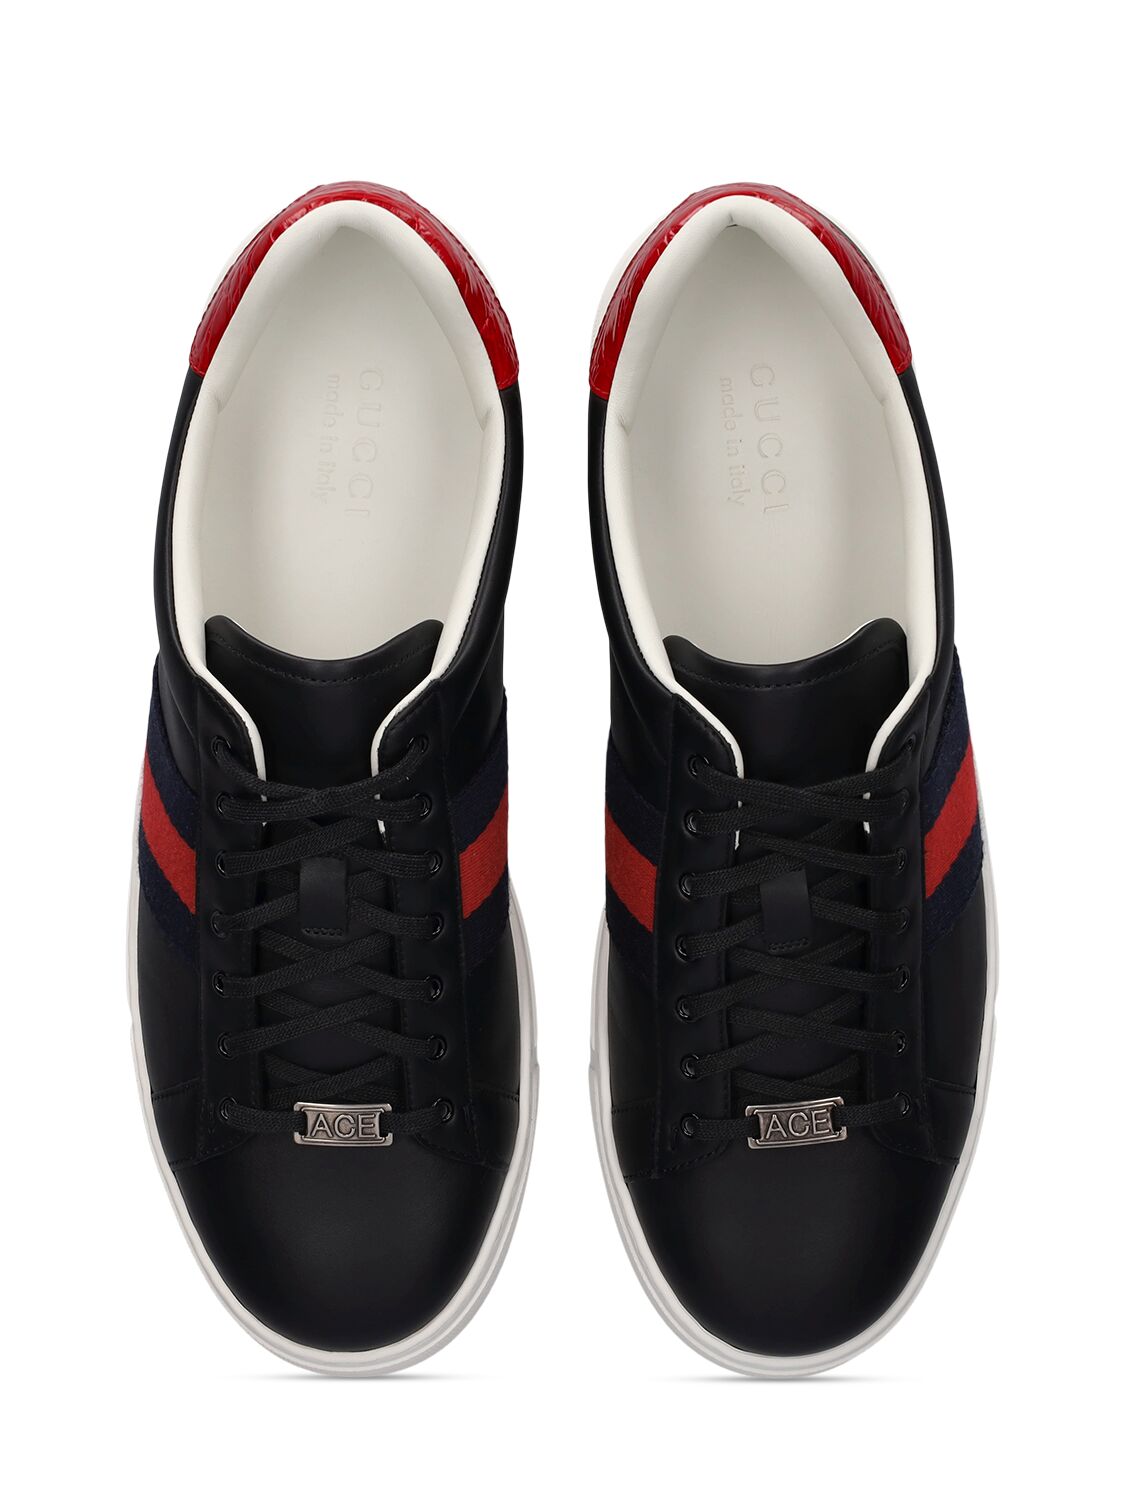 Shop Gucci Ace Leather Sneakers In Black,multi